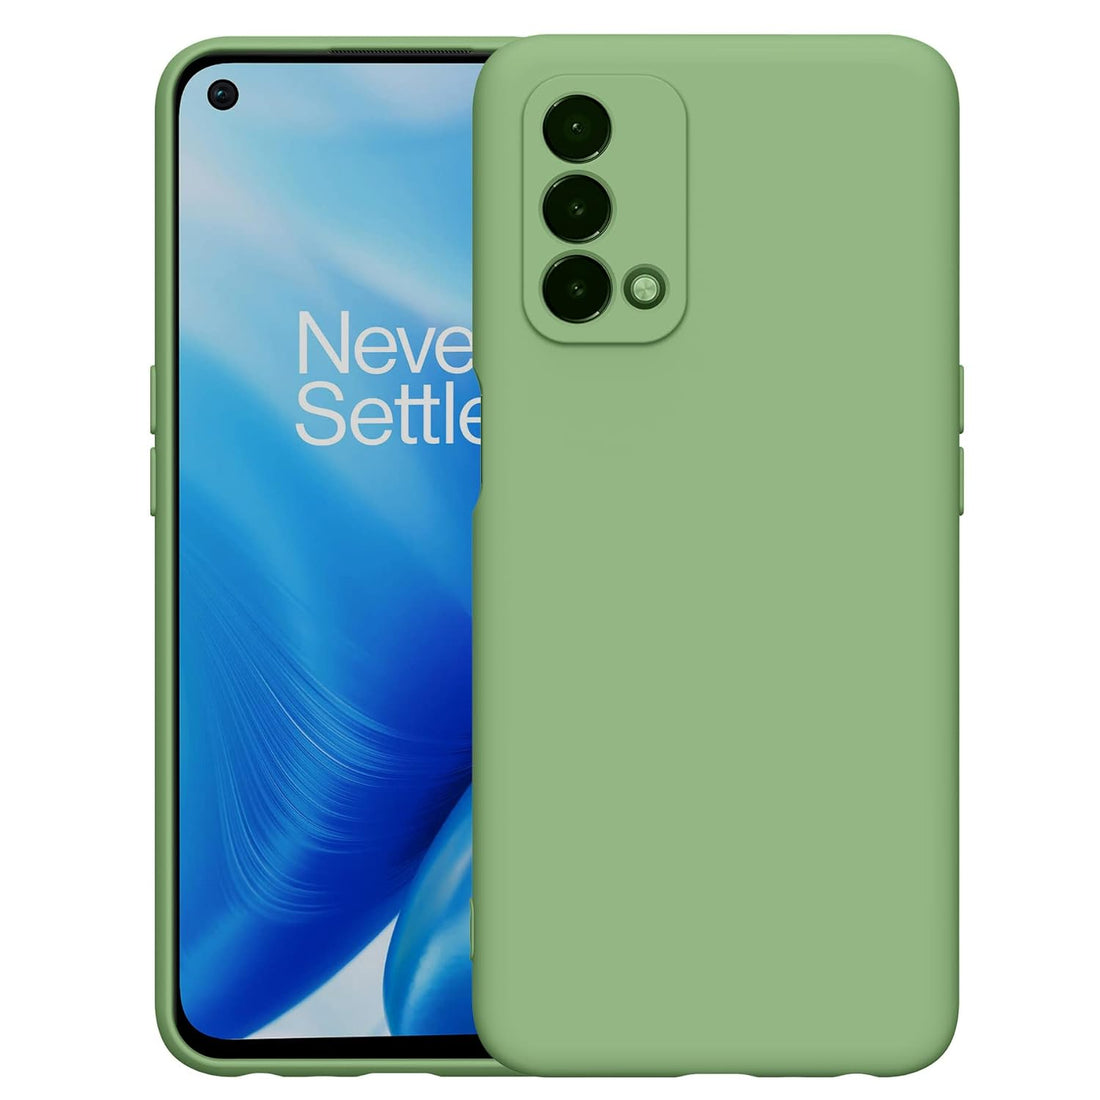 Foluu for OnePlus Nord N200 5G Case, Liquid Silicone Gel Rubber Bumper Case with Soft Microfiber Lining Cushion Slim Hard Shell Shockproof Protective Cover for OnePlus Nord N200 5G 2021 (Green)